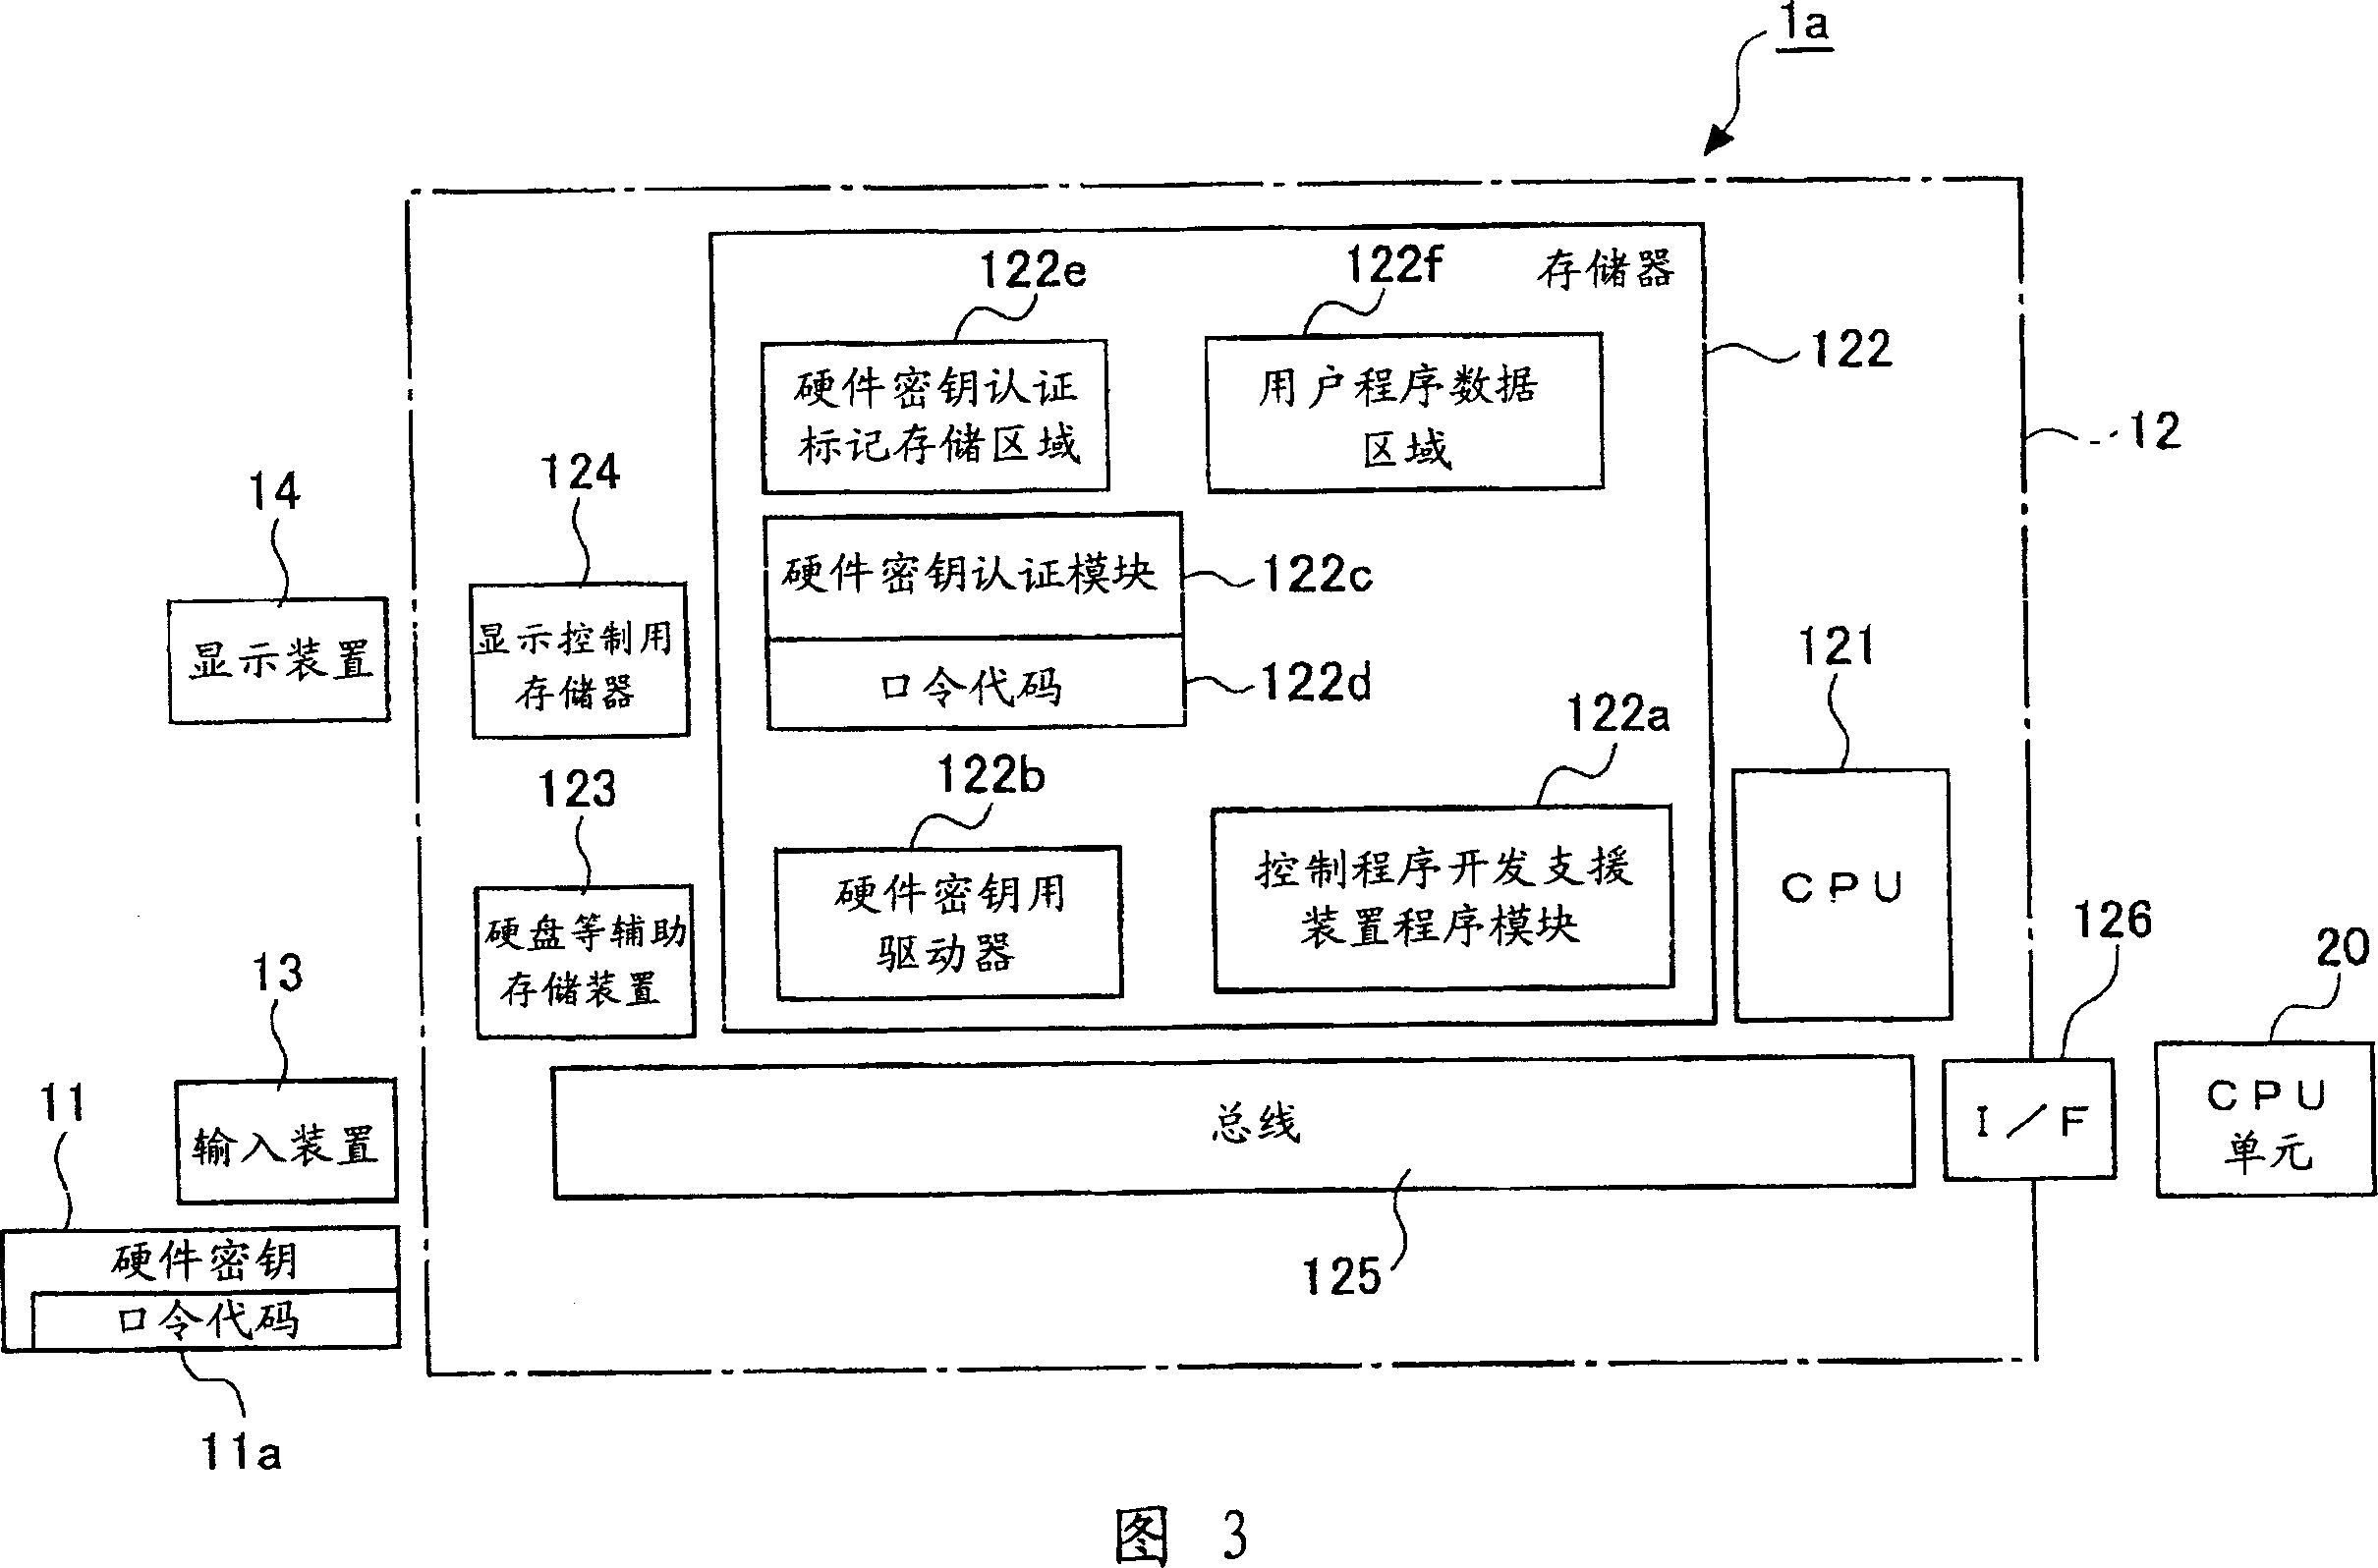 Programmable controller system